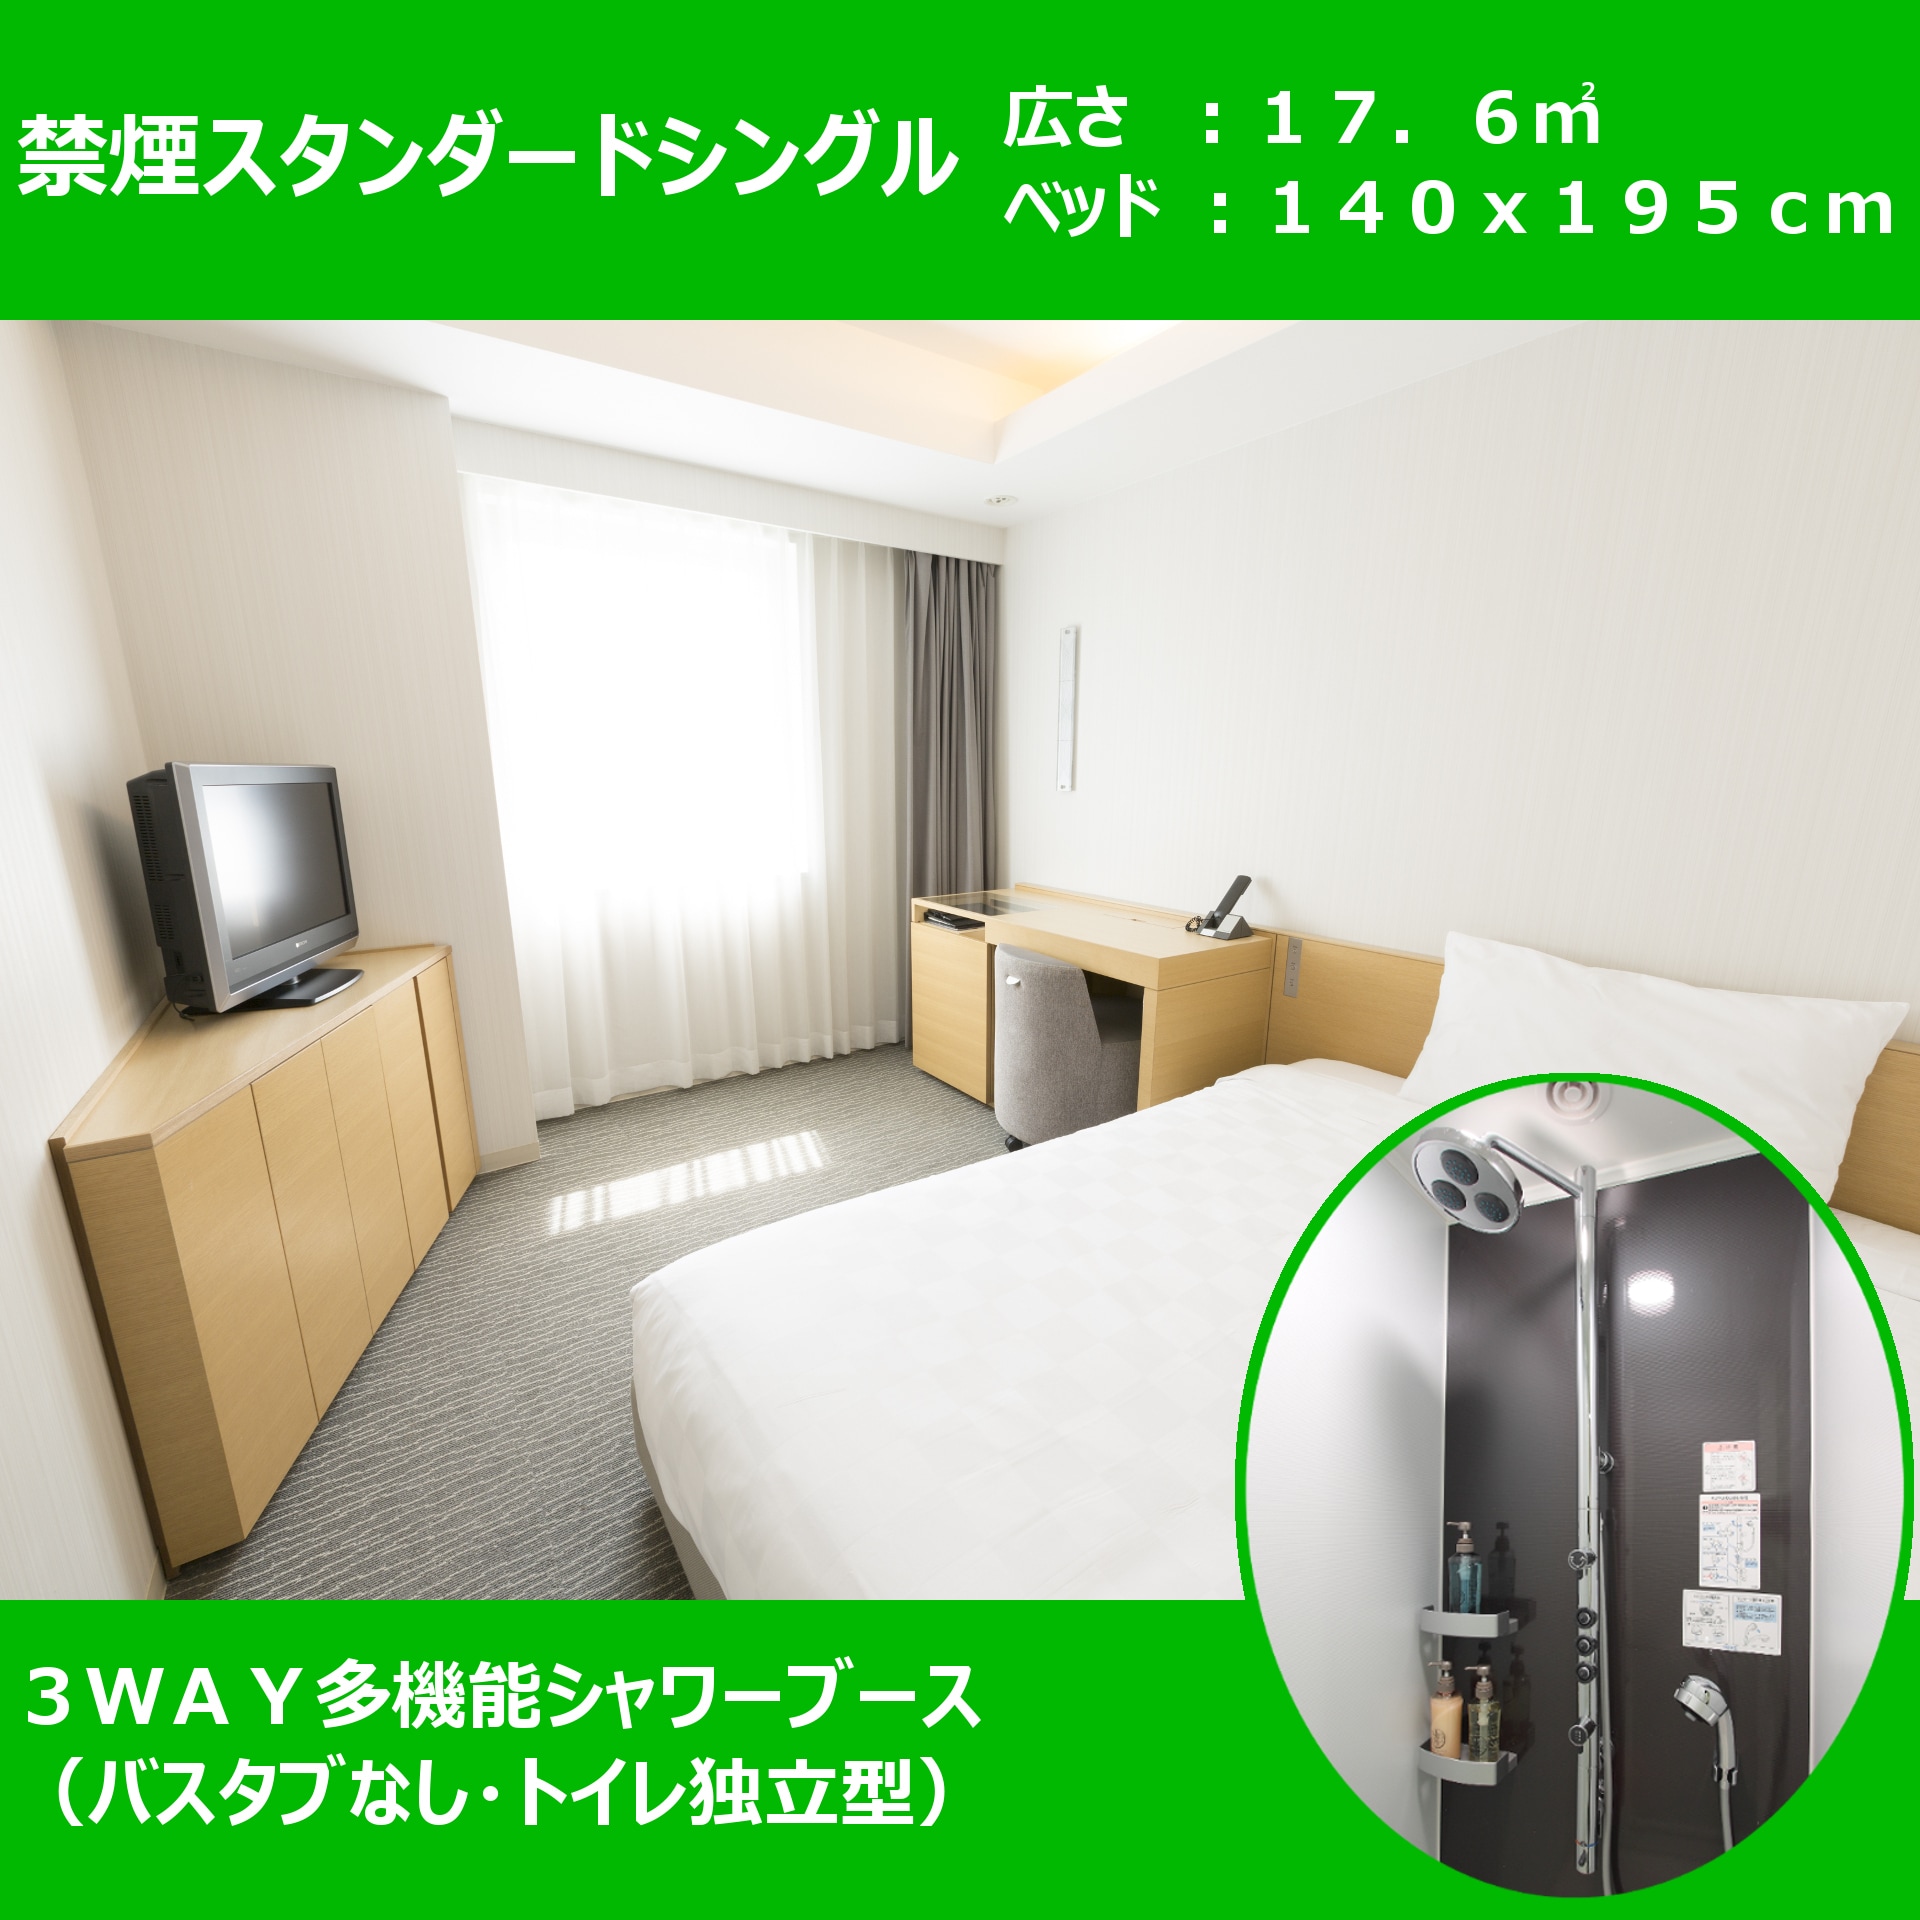 Non-smoking standard single ■ 17.6 square meters, bed width 140 cm ■ 3WAY multifunctional shower (without bathtub)